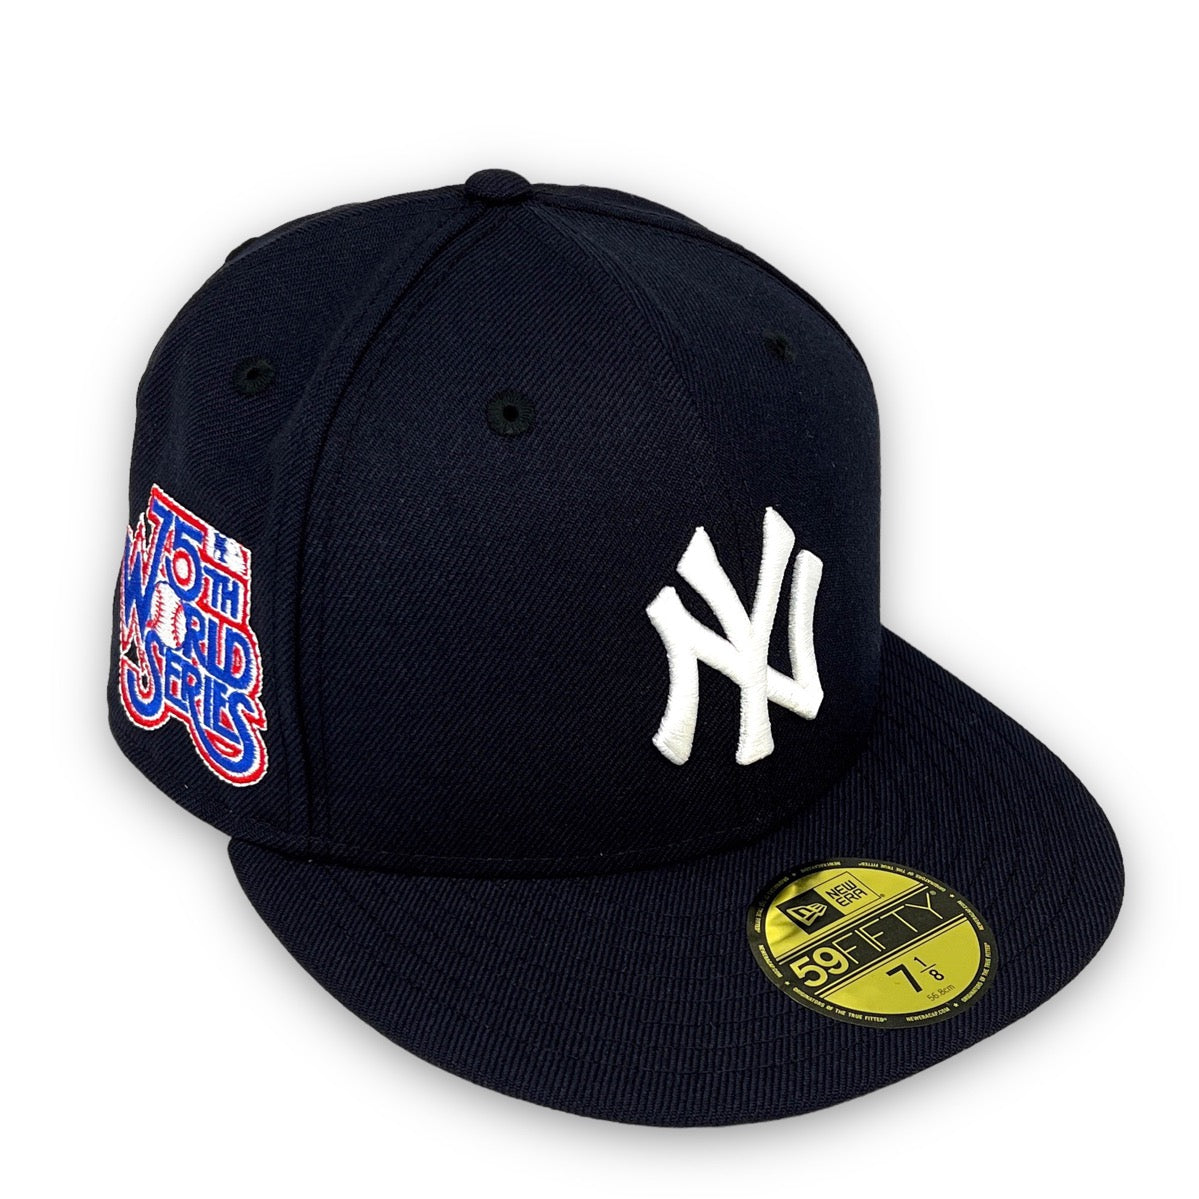 Grey 59FIFTY KING – 75 WS Bottom New CAP USA Era Navy Hat Fitted Yankees